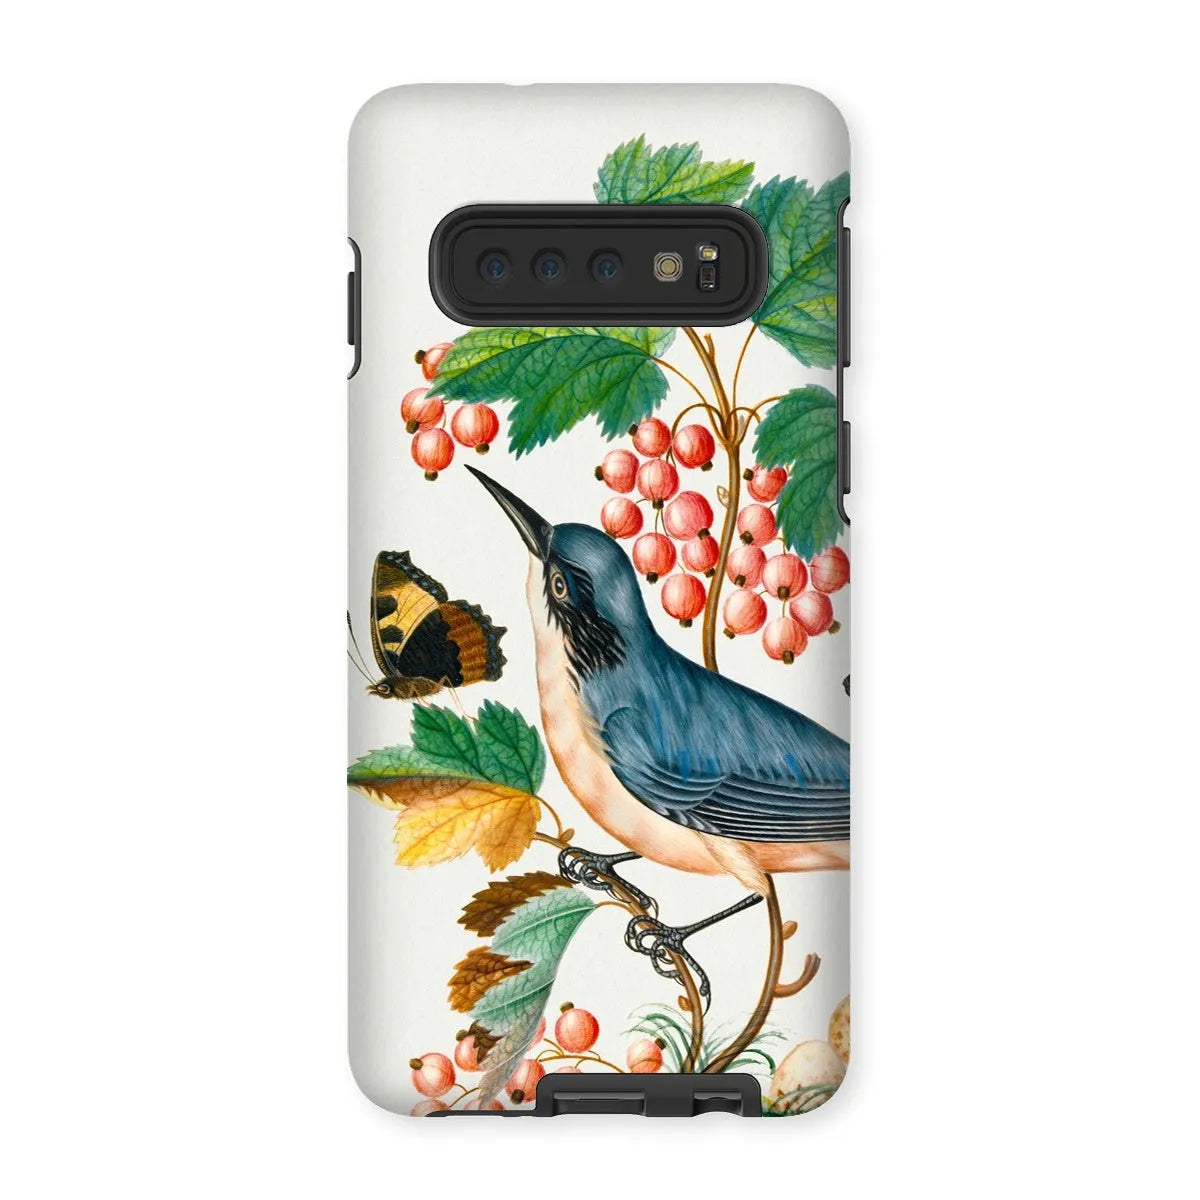 Warbler Admiral Wasps & Ants - Art Phone Case - James Bolton - Samsung Galaxy S10 / Matte - Mobile Phone Cases